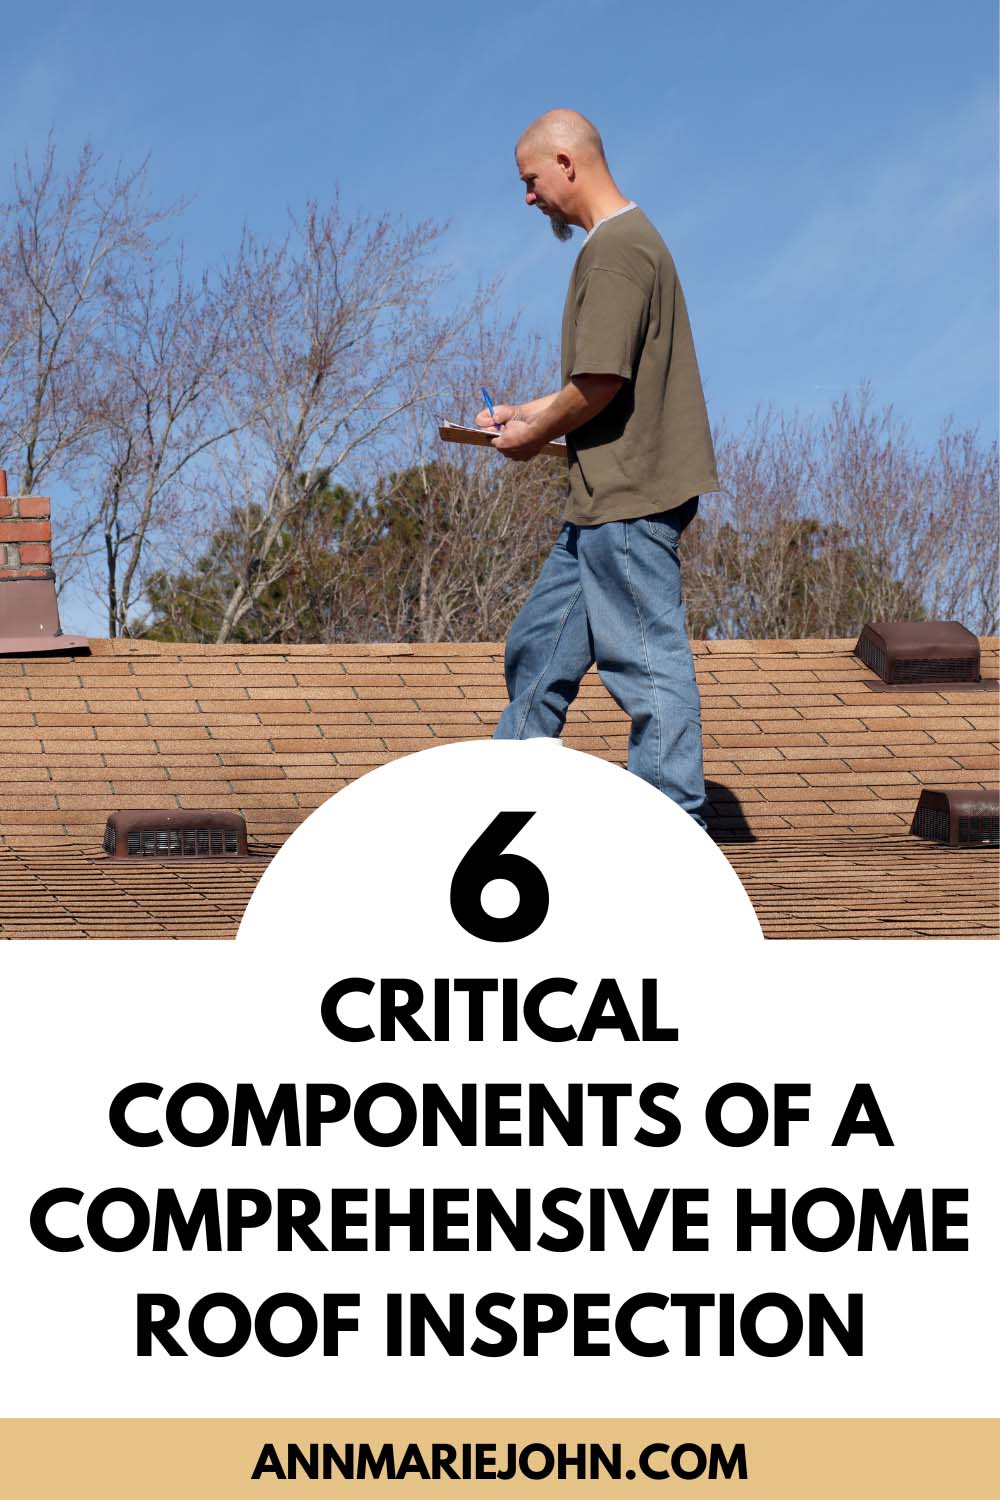 6 Critical Components of a Comprehensive Home Roof Inspection